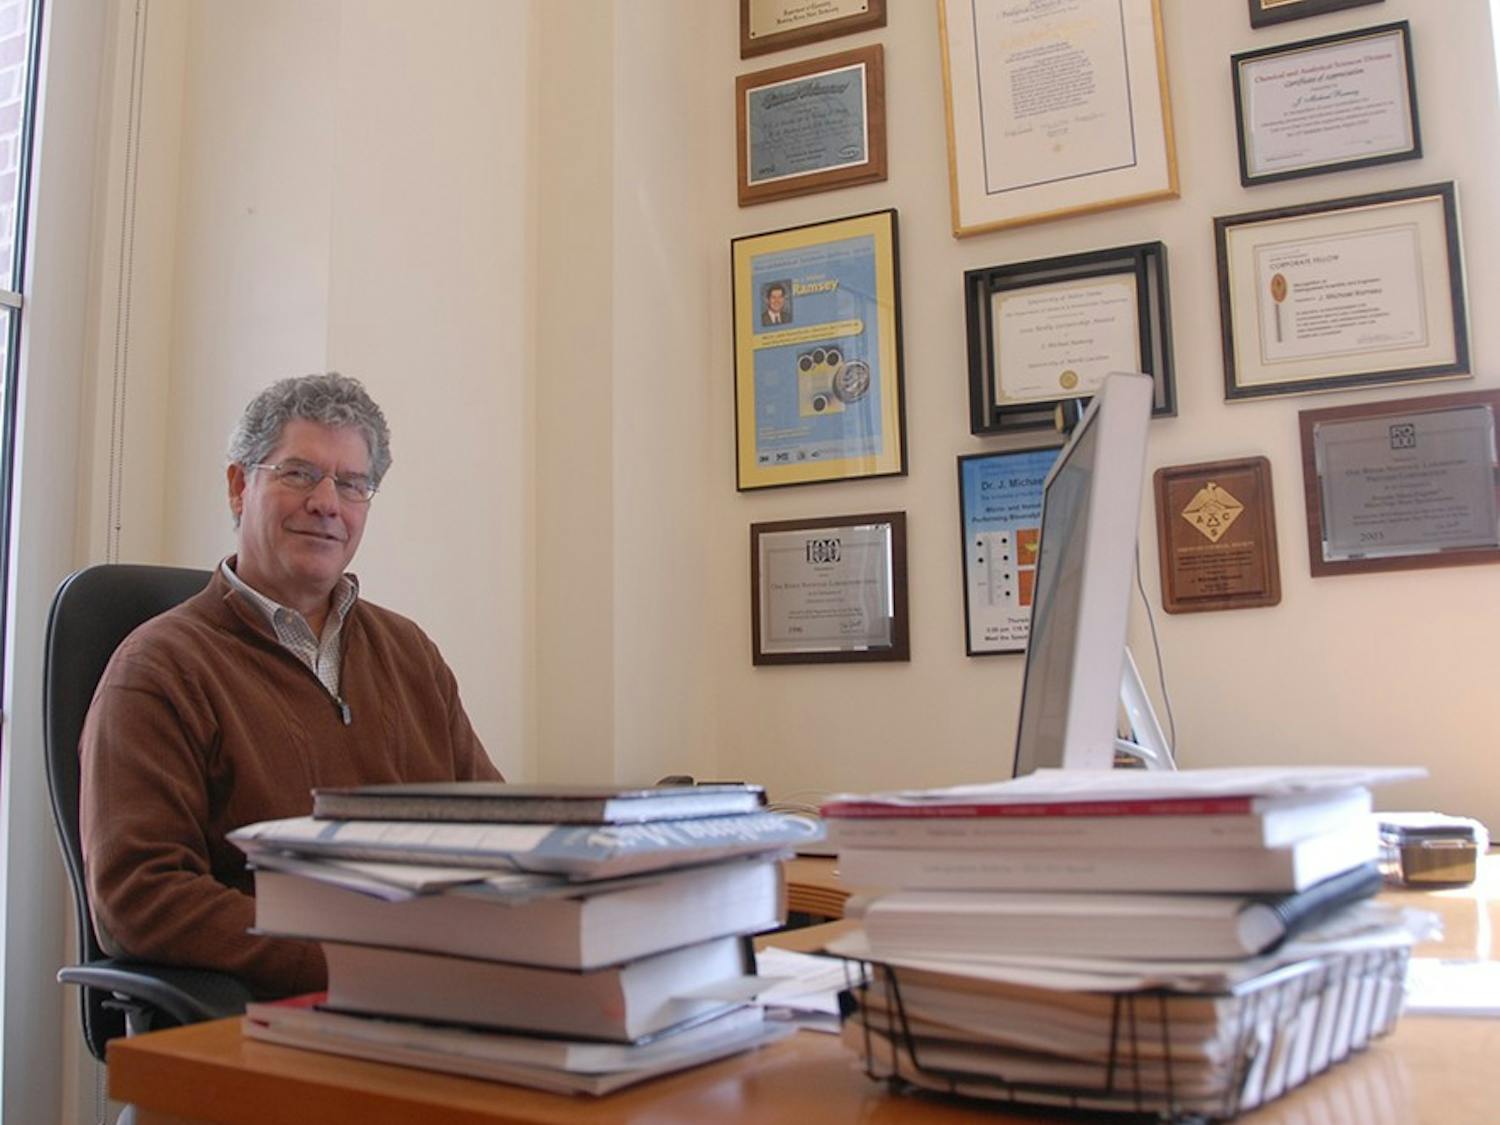 UNC Goldby Distinguished Professor of Chemistry J. Michael Ramsey works in his office in Chapman Hall on Tuesday morning. Ramsey has been elected to the National Academy of Engineering, one of the highest professional distinctions awarded to a scientist or engineer. 